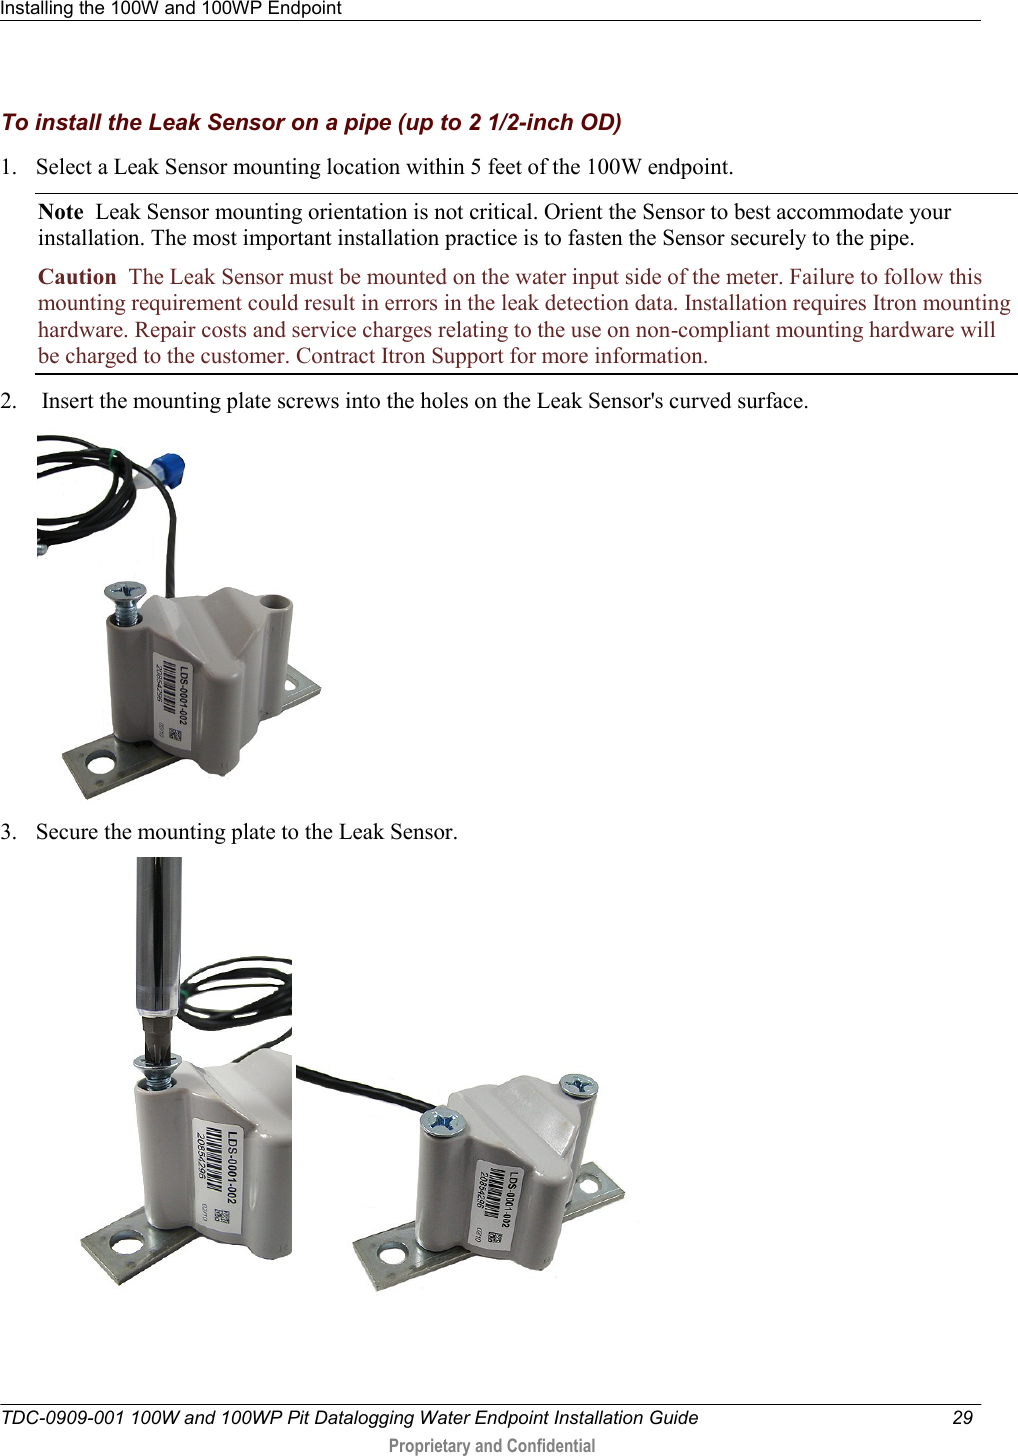 Installing the 100W and 100WP Endpoint   TDC-0909-001 100W and 100WP Pit Datalogging Water Endpoint Installation Guide  29   Proprietary and Confidential     To install the Leak Sensor on a pipe (up to 2 1/2-inch OD) 1. Select a Leak Sensor mounting location within 5 feet of the 100W endpoint.  Note  Leak Sensor mounting orientation is not critical. Orient the Sensor to best accommodate your installation. The most important installation practice is to fasten the Sensor securely to the pipe.  Caution  The Leak Sensor must be mounted on the water input side of the meter. Failure to follow this mounting requirement could result in errors in the leak detection data. Installation requires Itron mounting hardware. Repair costs and service charges relating to the use on non-compliant mounting hardware will be charged to the customer. Contract Itron Support for more information. 2.  Insert the mounting plate screws into the holes on the Leak Sensor&apos;s curved surface.  3. Secure the mounting plate to the Leak Sensor.    